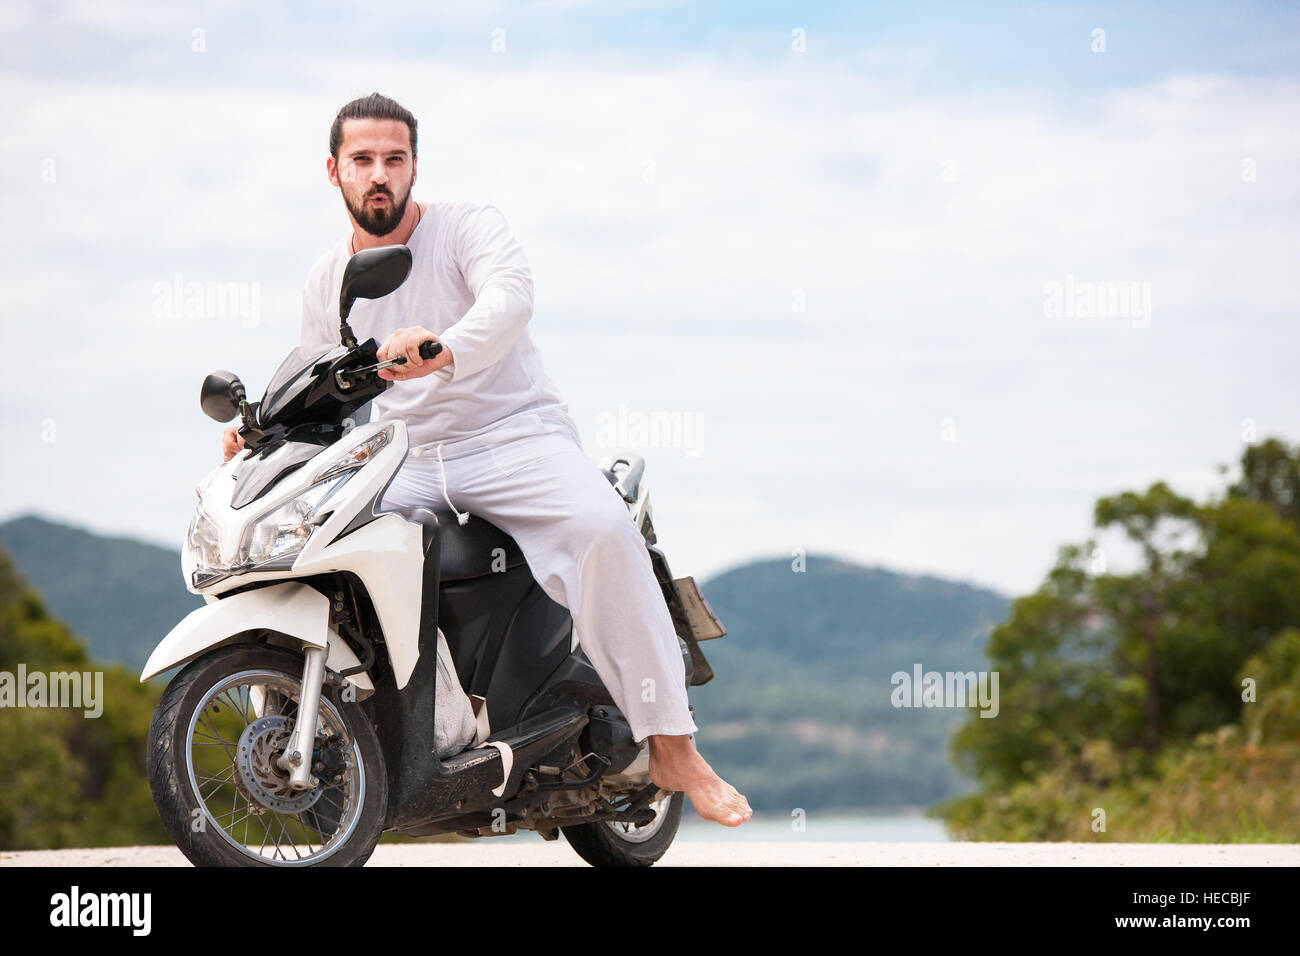 Brutal biker with beard in white sitting on motorbike. Sunny day in the mountains. Stock Photo